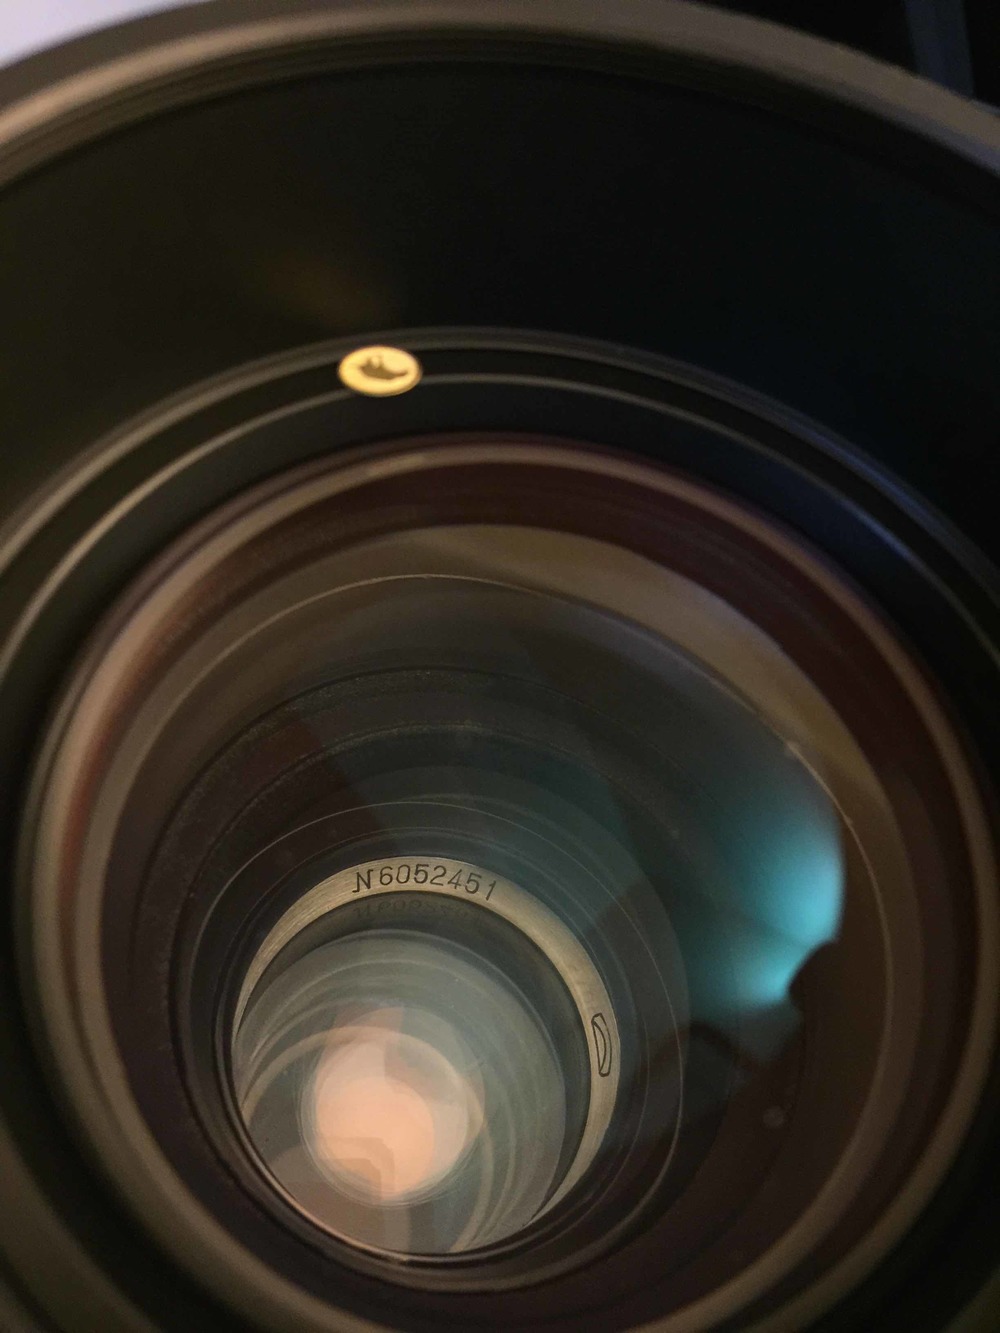 The core of the Trump are old School Helios 44-2 lenses.